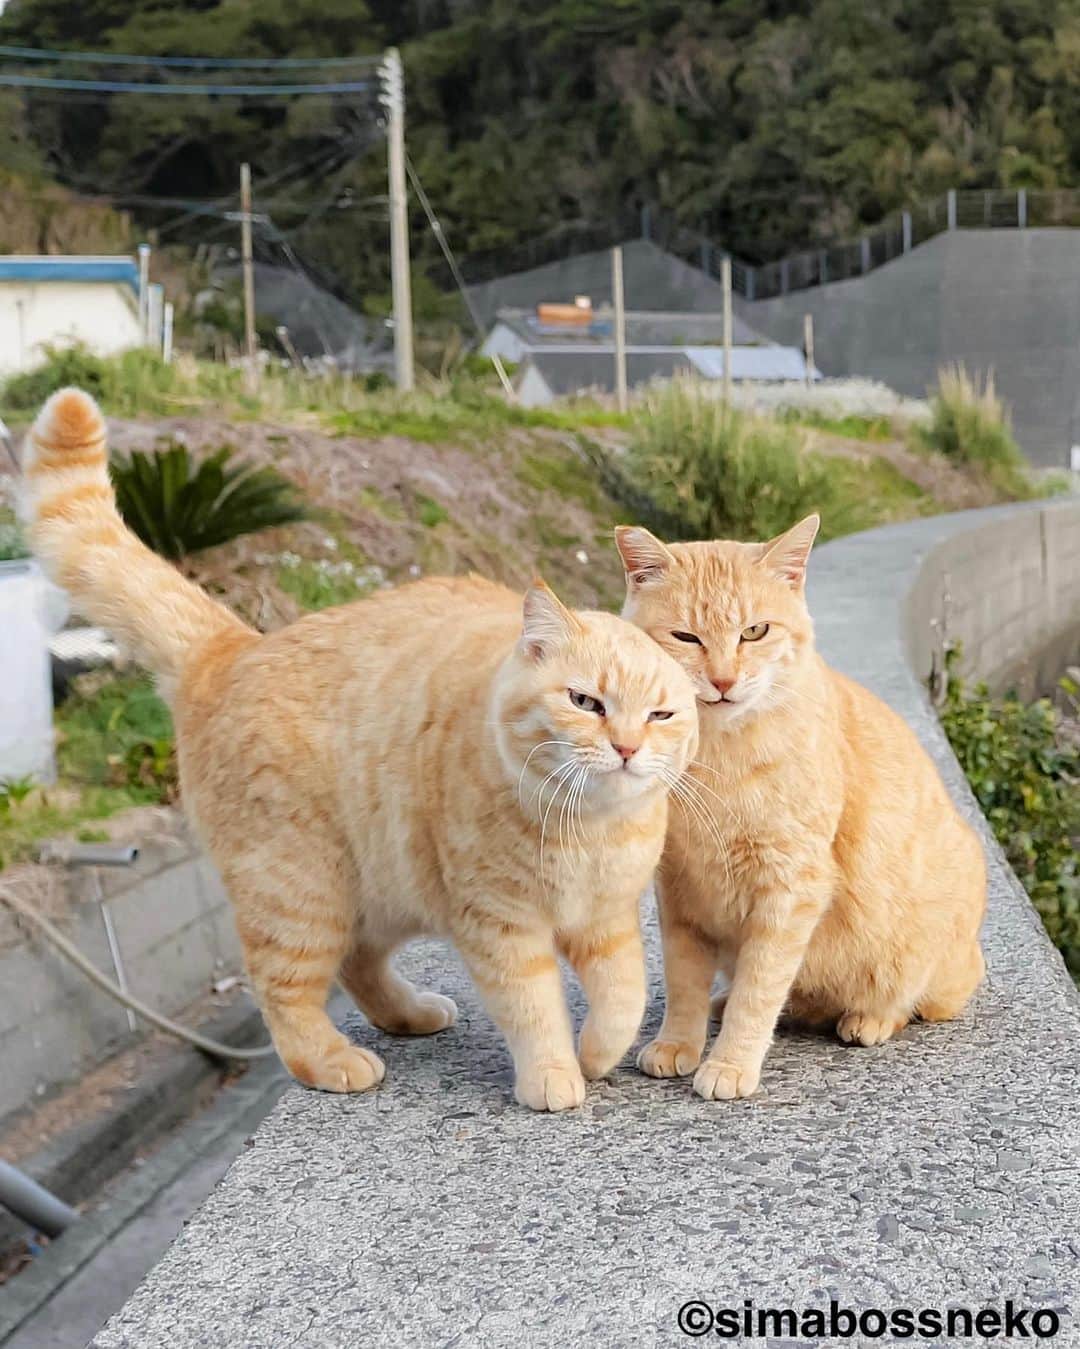 simabossnekoさんのインスタグラム写真 - (simabossnekoInstagram)「・ めっちゃ仲良し😽😸💓 Good  friends✨  5枚目の投稿は動画です。 The 5th post is video. Swipeしてね←←🐾  ・ 〜お知らせ〜 新作写真集「島にゃんこ」好評発売中❣️ @simabossneko と、ぺにゃんこ( @p_nyanco22 )との初共著🐾  日本の島々で7年間撮り続けてきた、島の猫さん達のとびっきりの表情やしぐさがいっぱい✨ 厳選したベストショットから初公開の作品まで、愛おしくて幸せな瞬間を集めました。  ★Amazonほかオンライン書店、本屋さんにて  お気に入りの一冊になれば嬉しく思います☺️  📘A5変形サイズ／88ページ 1,210円(税込) ワニブックス刊  Amazonへは @simabossneko もしくは @p_nyanco22 のプロフィールURLよりご覧いただけます。 ・ ・ 【Notice】 NEW 3rd Photobook "Shima Nyanko (Island Cats)"  The book is co-authored by @simabossneko and @p_nyanco22  There are lots of wonderful photos of island cats✨   〜Description of the work〜 The cute cats that we have been shooting for 7 years in the islands of Japan.  From the carefully selected best shots to the first public photo, we have collected lovely and happy gestures. Kissing, cuddling, rubbing, synchronizing, playing, licking... The cats will heal you!  Please make a purchasing for this opportunity 😸🐾 The product page can be seen from the URL in the profile of @simabossneko or @p_nyanco22   ★Amazon Japan https://www.amazon.co.jp/dp/4847072863  It is possible to purchase and ship from Taiwan, Hong Kong, the USA, Korea, etc. ※ Shipping fee will be charged separately.  📘A5 variant size / 88 pages 1,210 JPY Published by Wanibooks ・ ・ #しまねこ #島猫 #ねこ #にゃんすたぐらむ #猫写真 #cats_of_world #catloversclub #pleasantcats #catstagram #meowed #ig_japan #lumixg9」6月24日 9時00分 - simabossneko